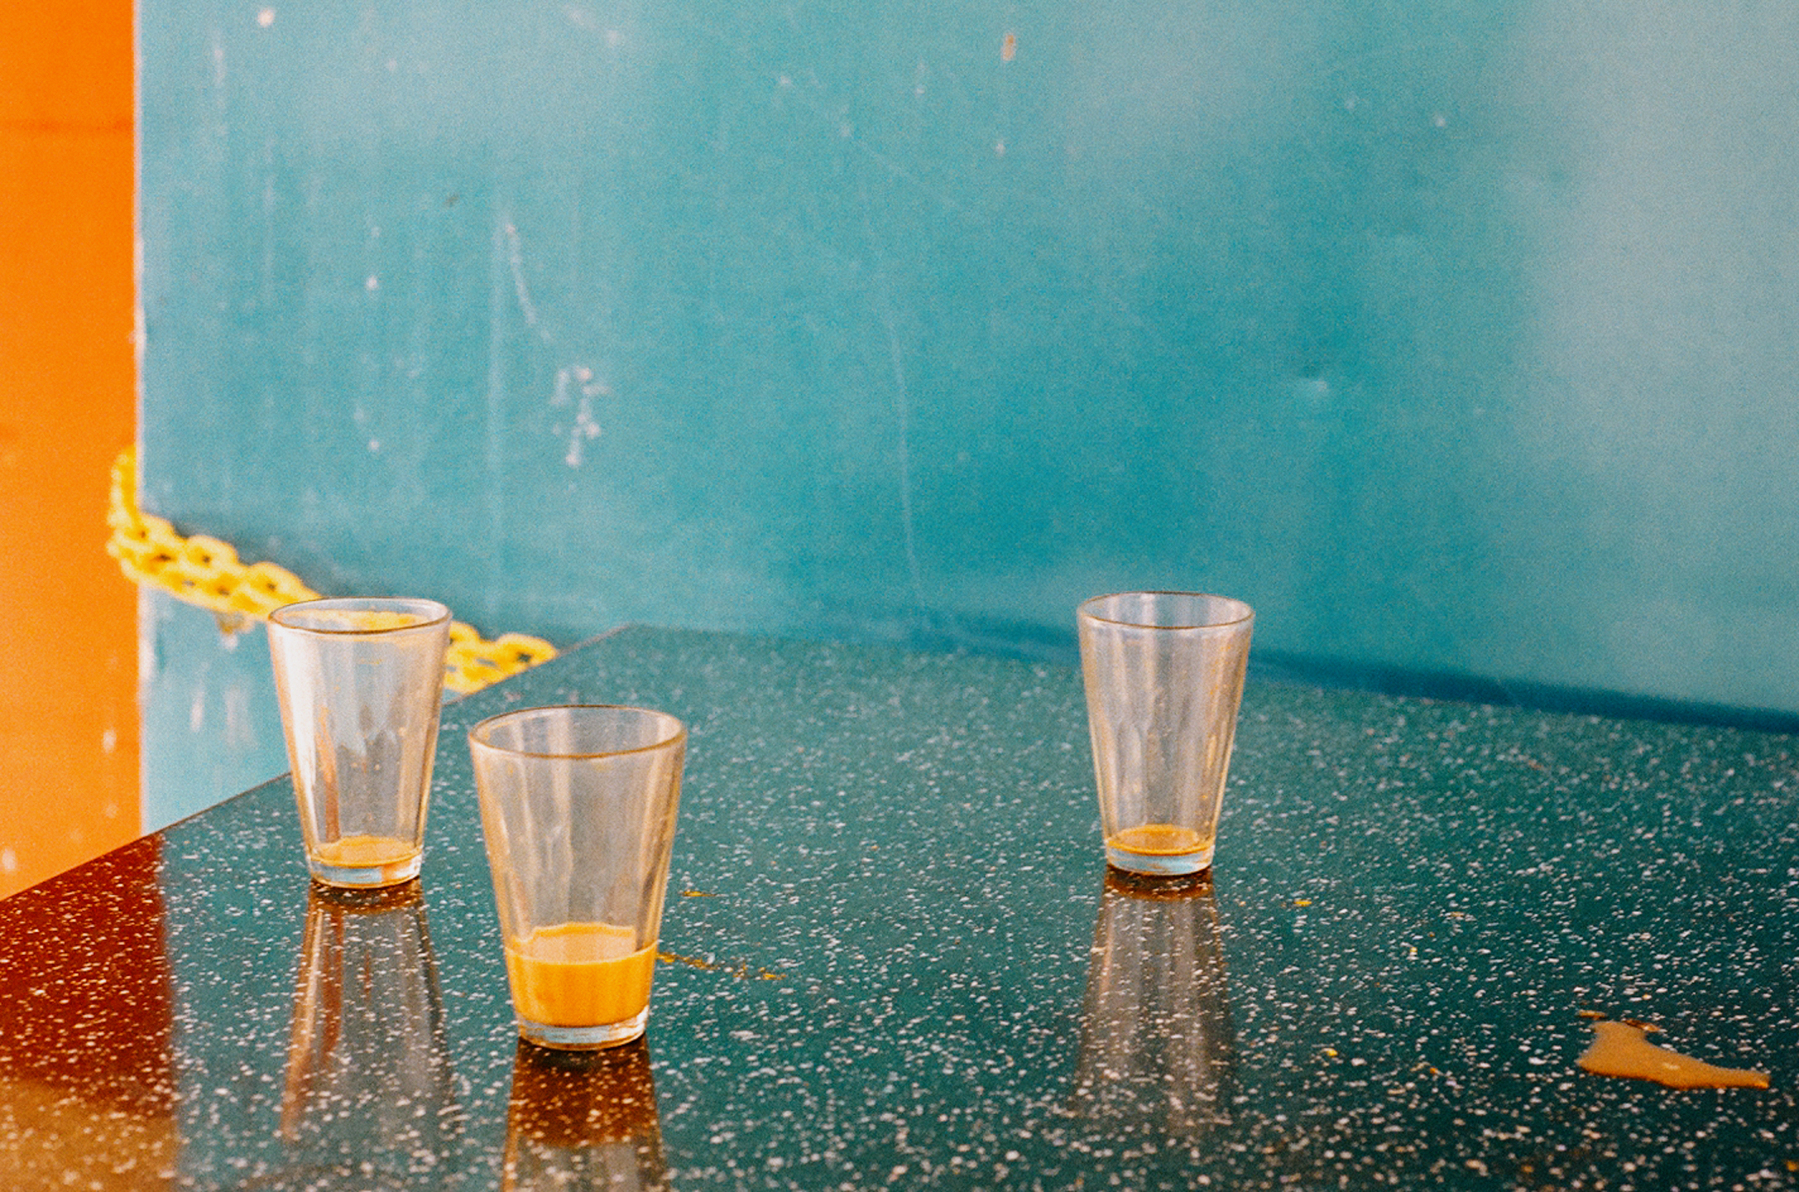 1. A scan of a color photo of three glasses on a table top in front of blue and tan walls